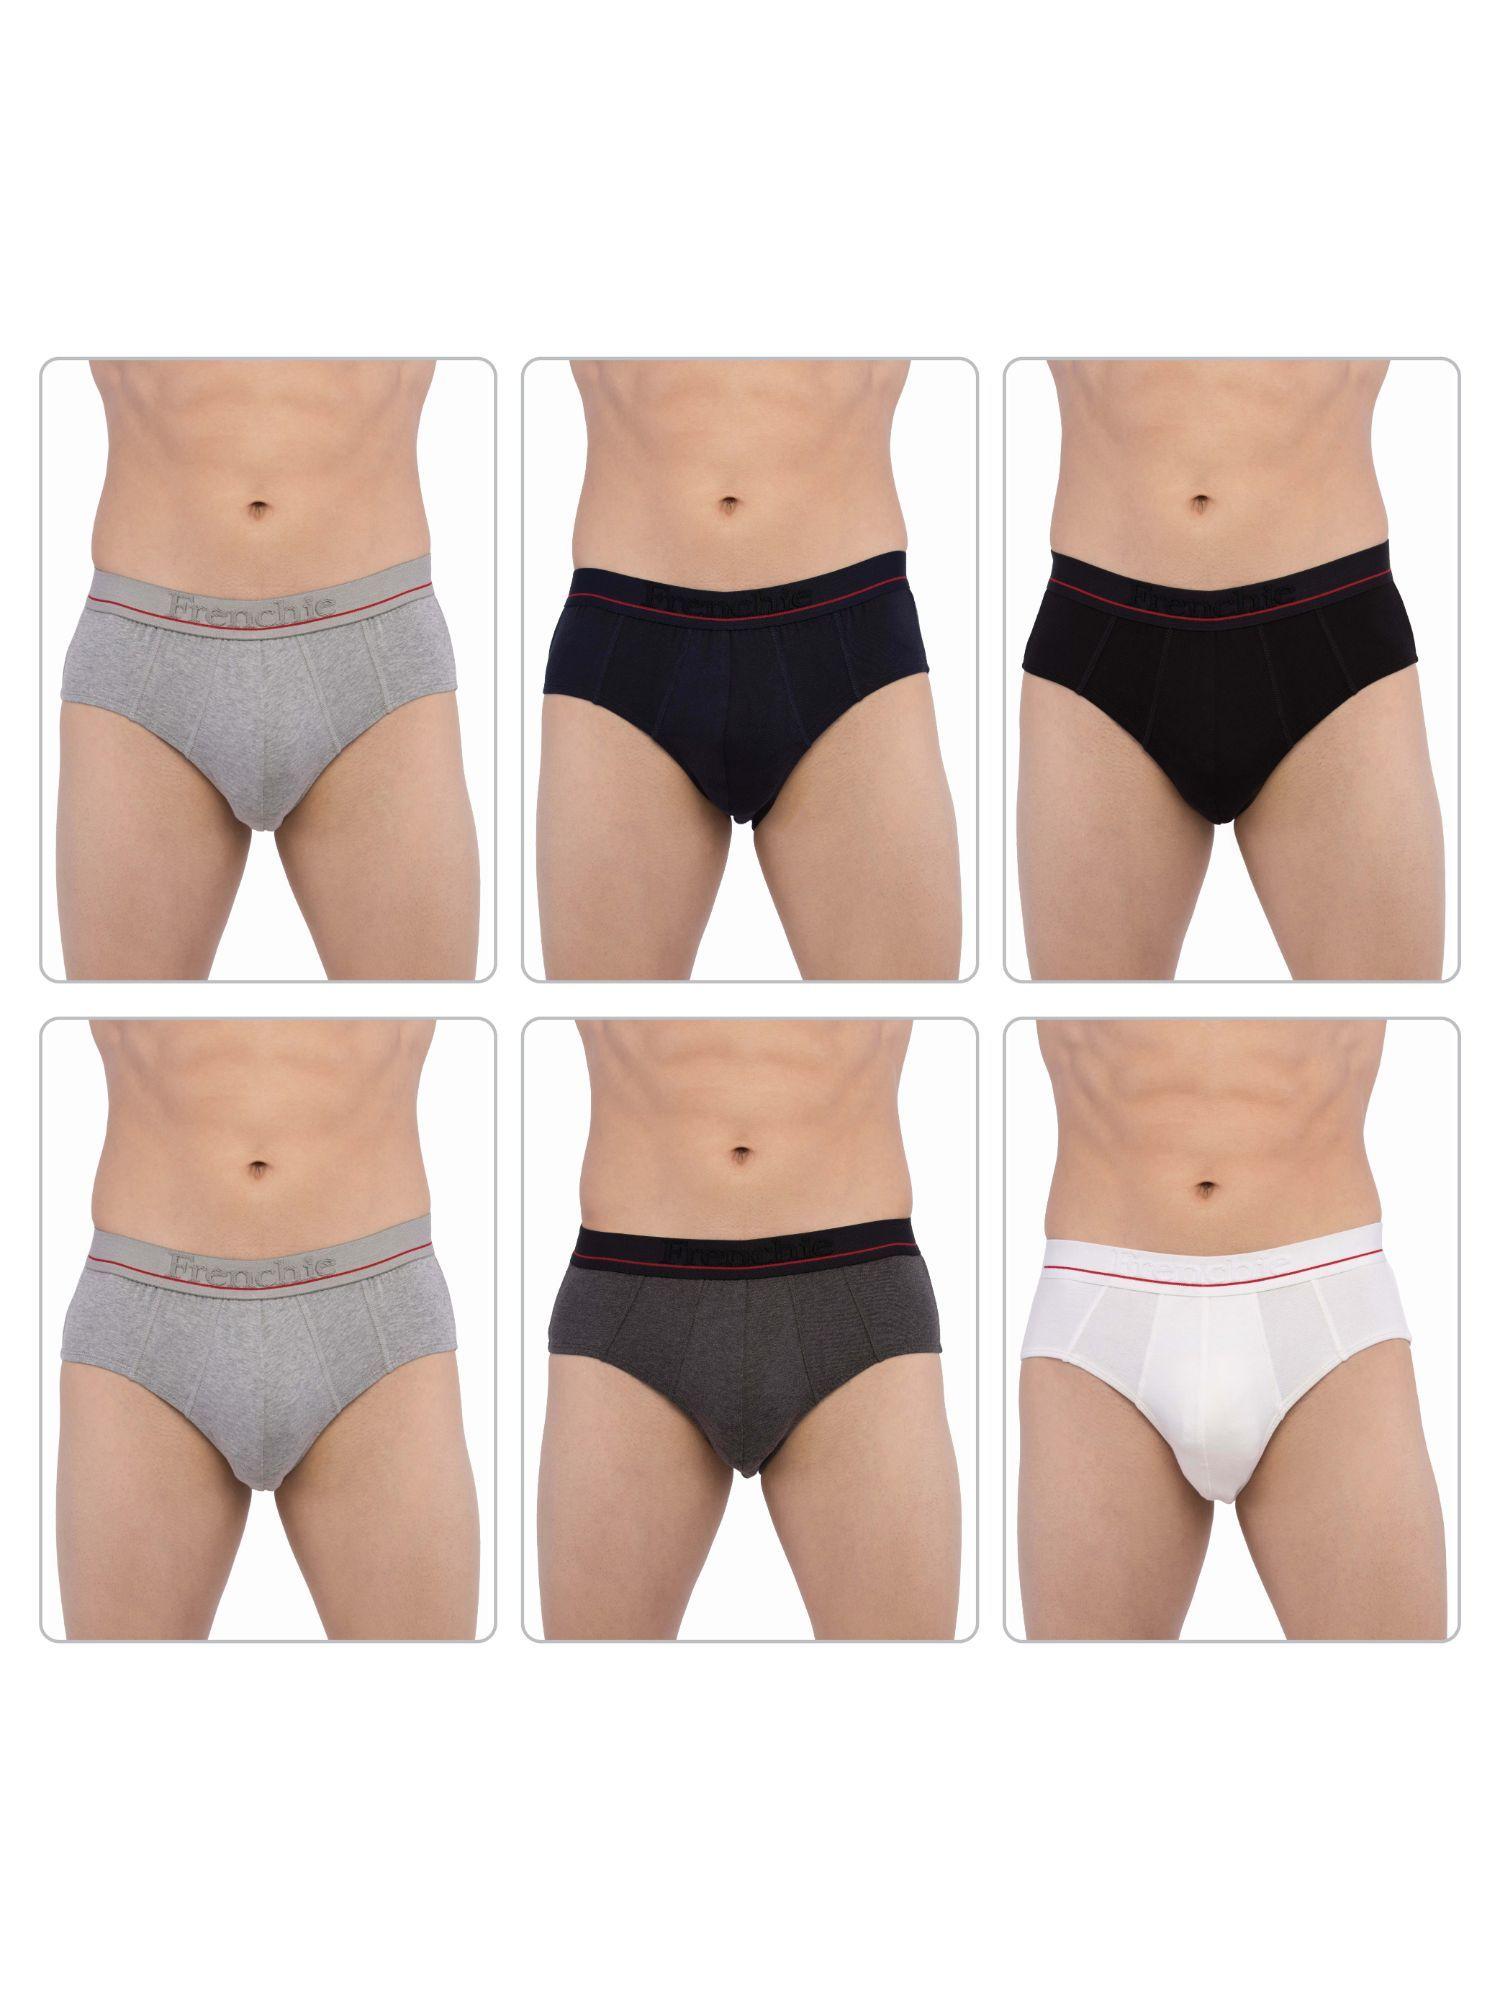 casuals-4003-mens-cotton-briefs-assorted-colours-(pack-of-6)